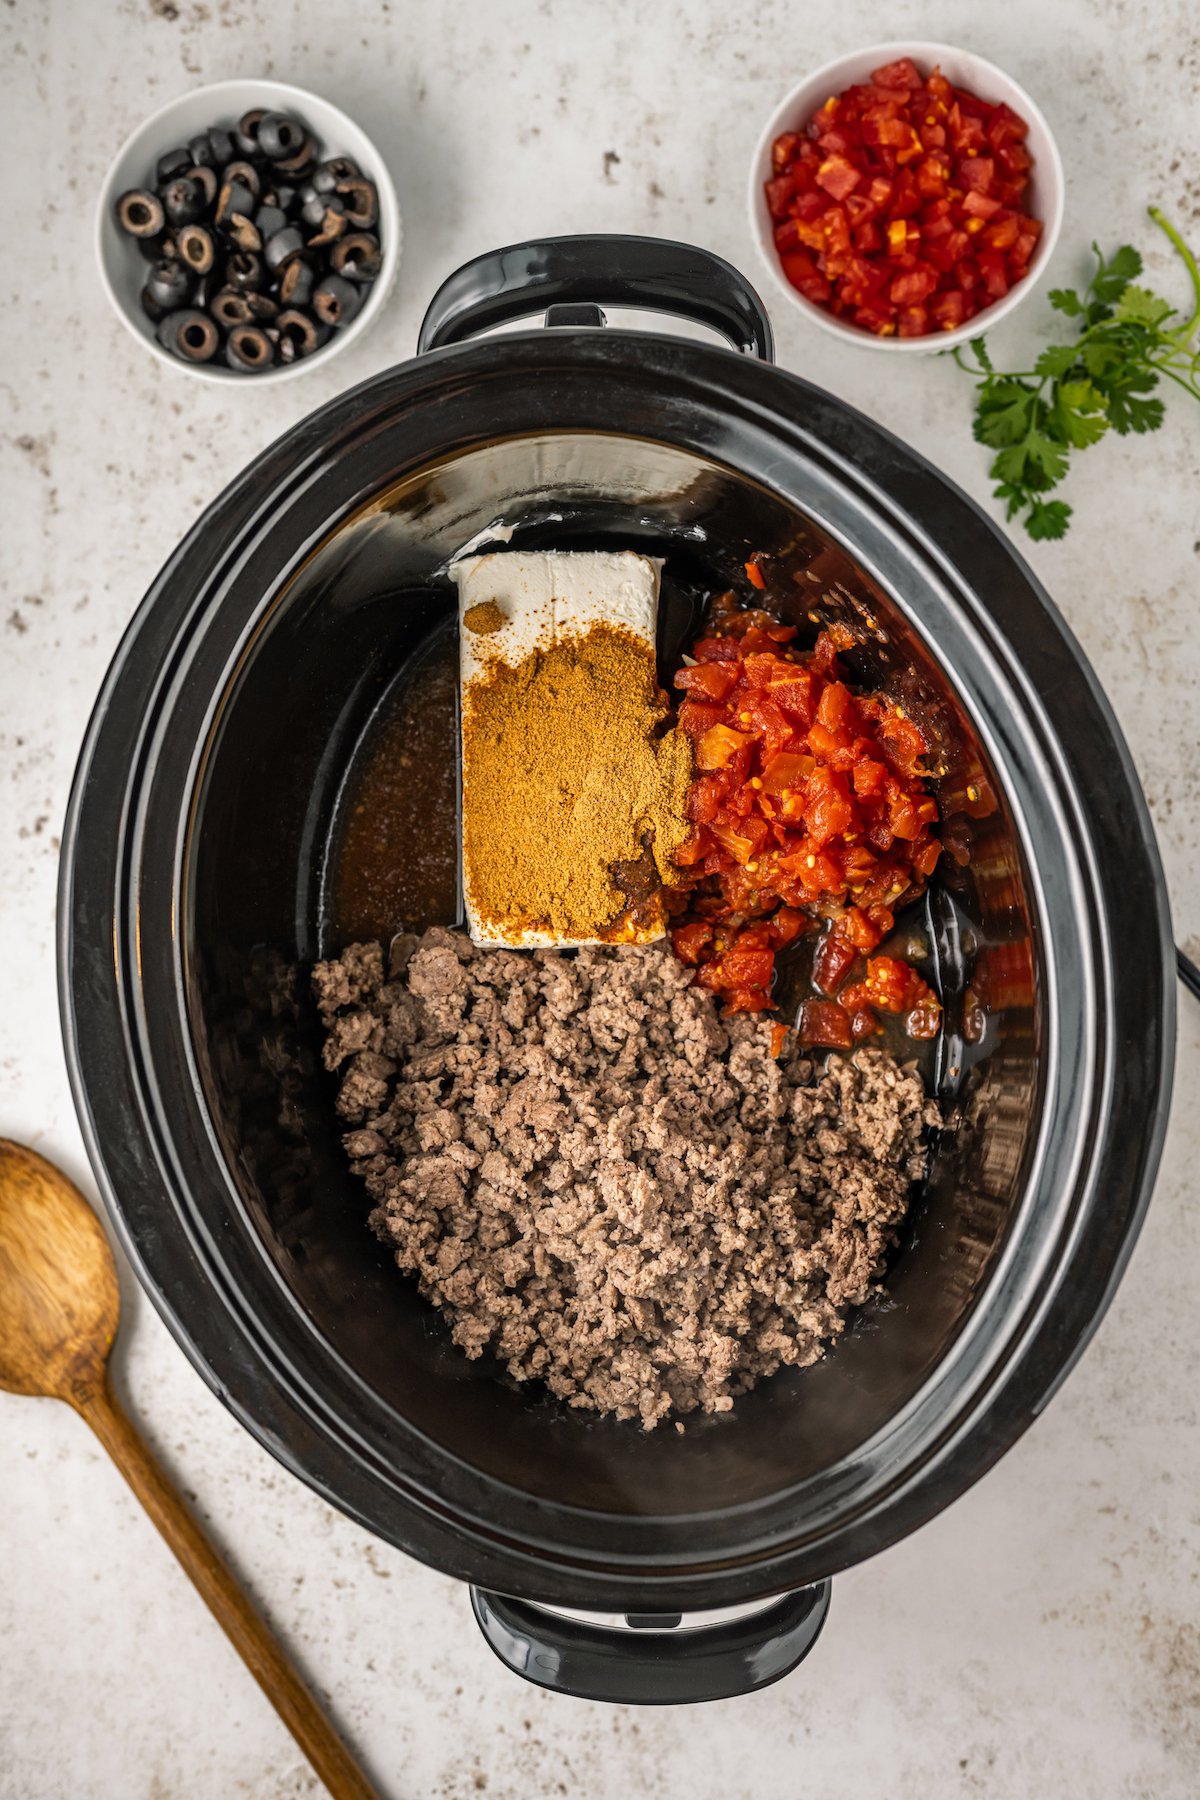 A crock pot filled with browned ground beef, Rotel, and taco spices.